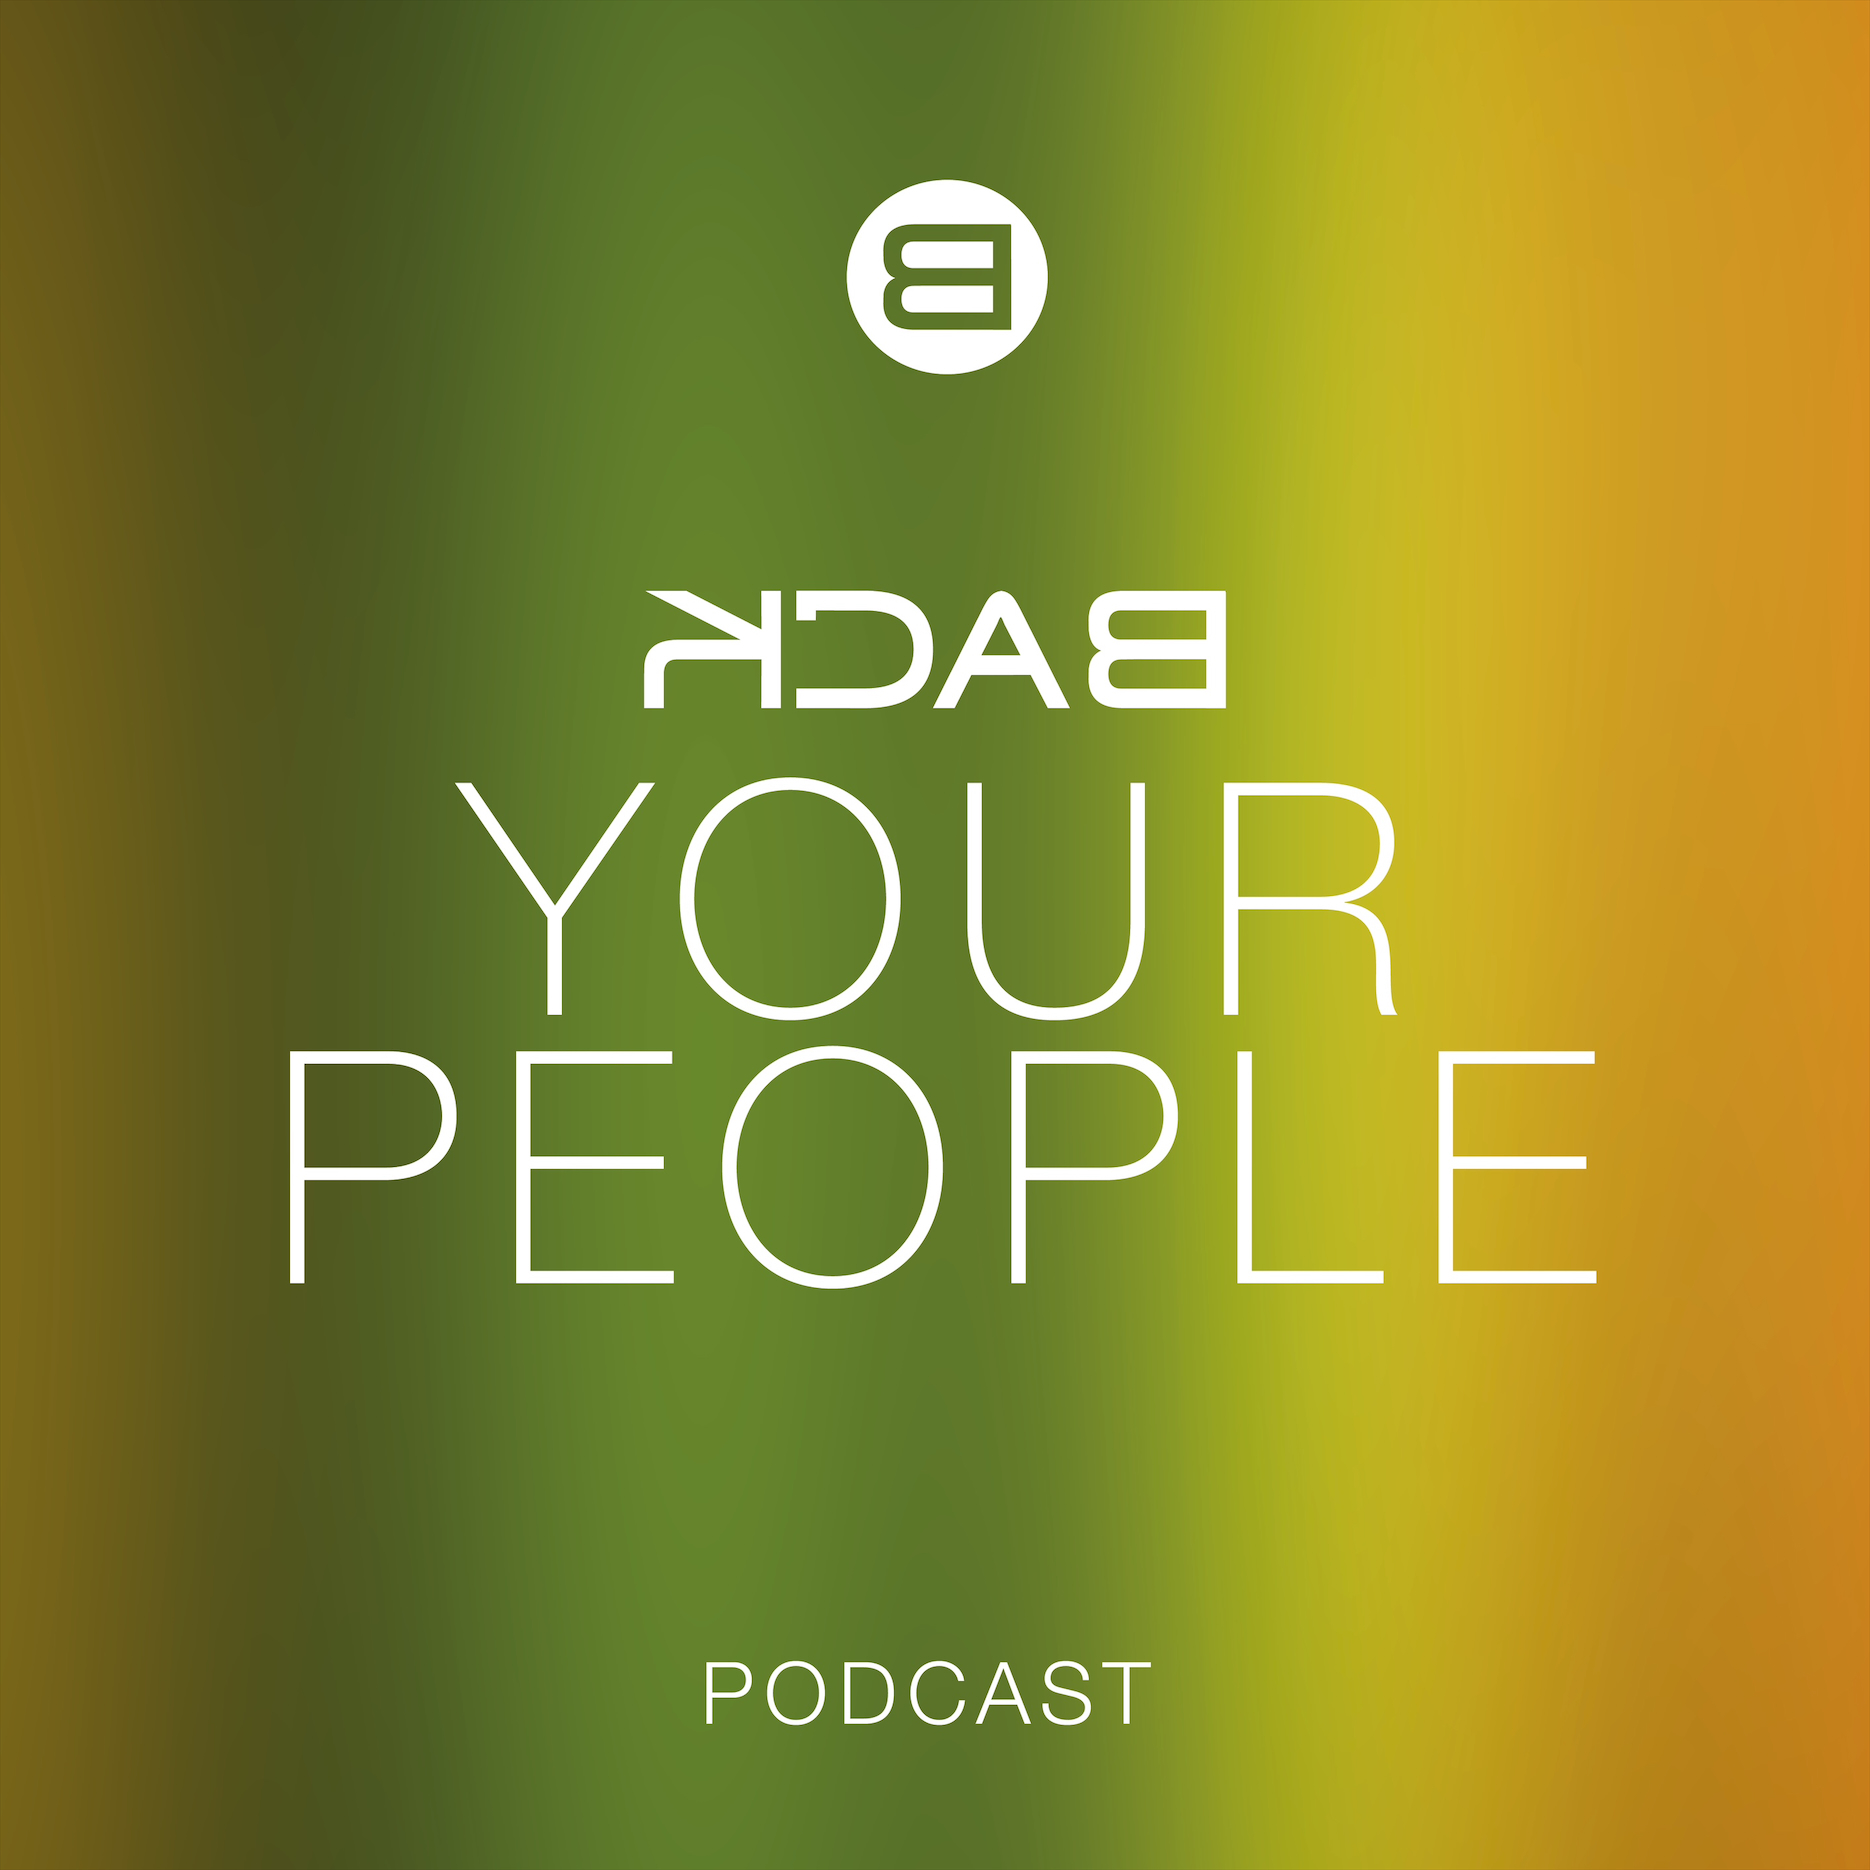 BACK your people podcast